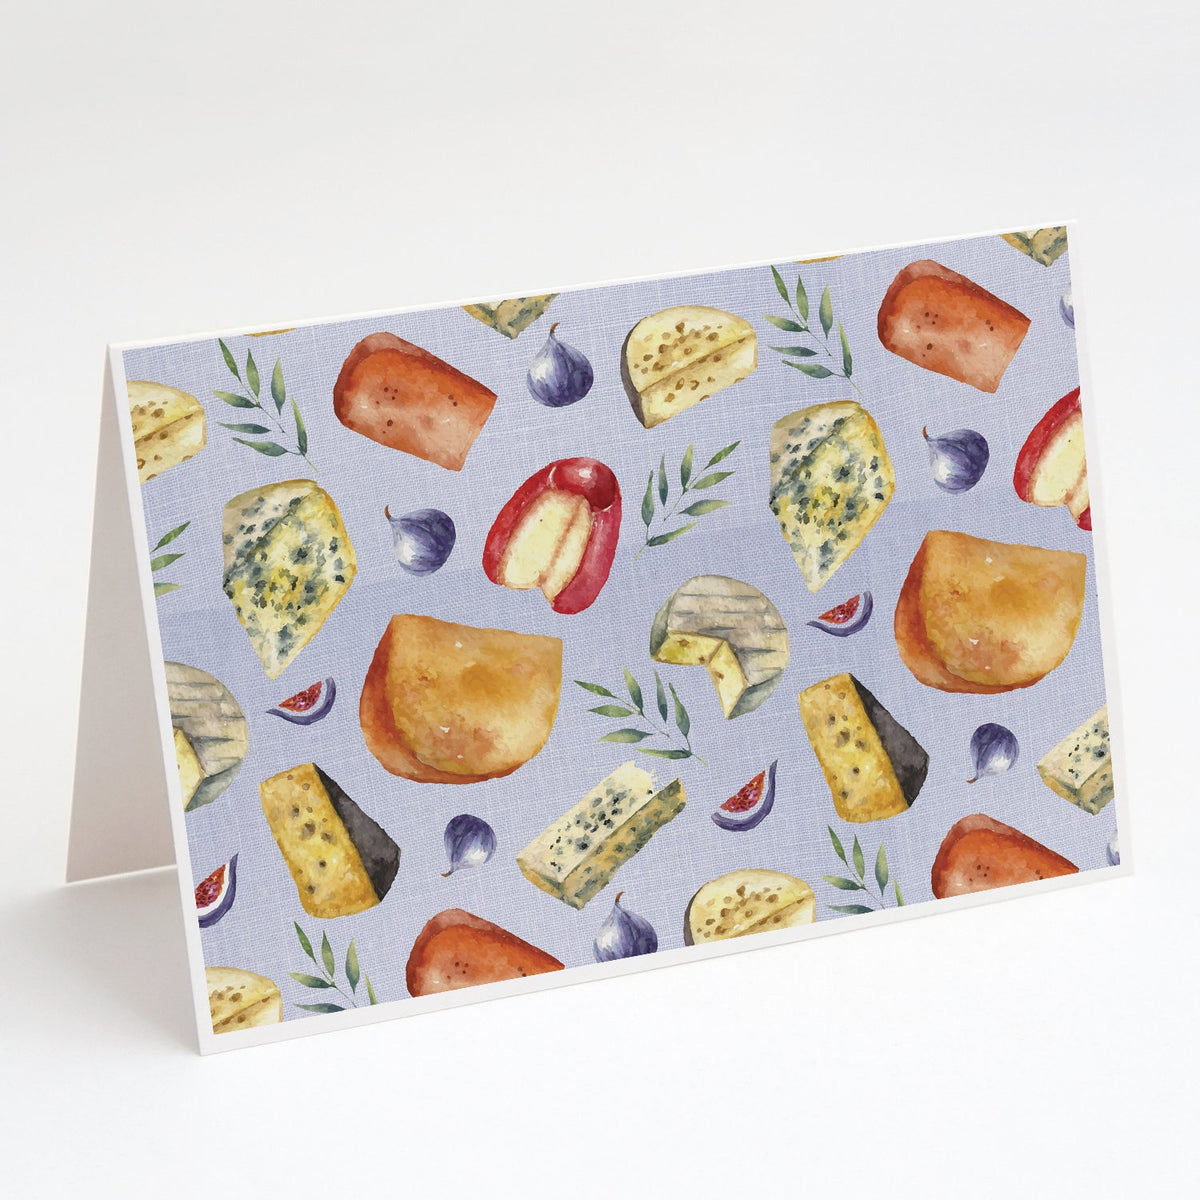 Buy this Assortment of Cheeses Greeting Cards and Envelopes Pack of 8